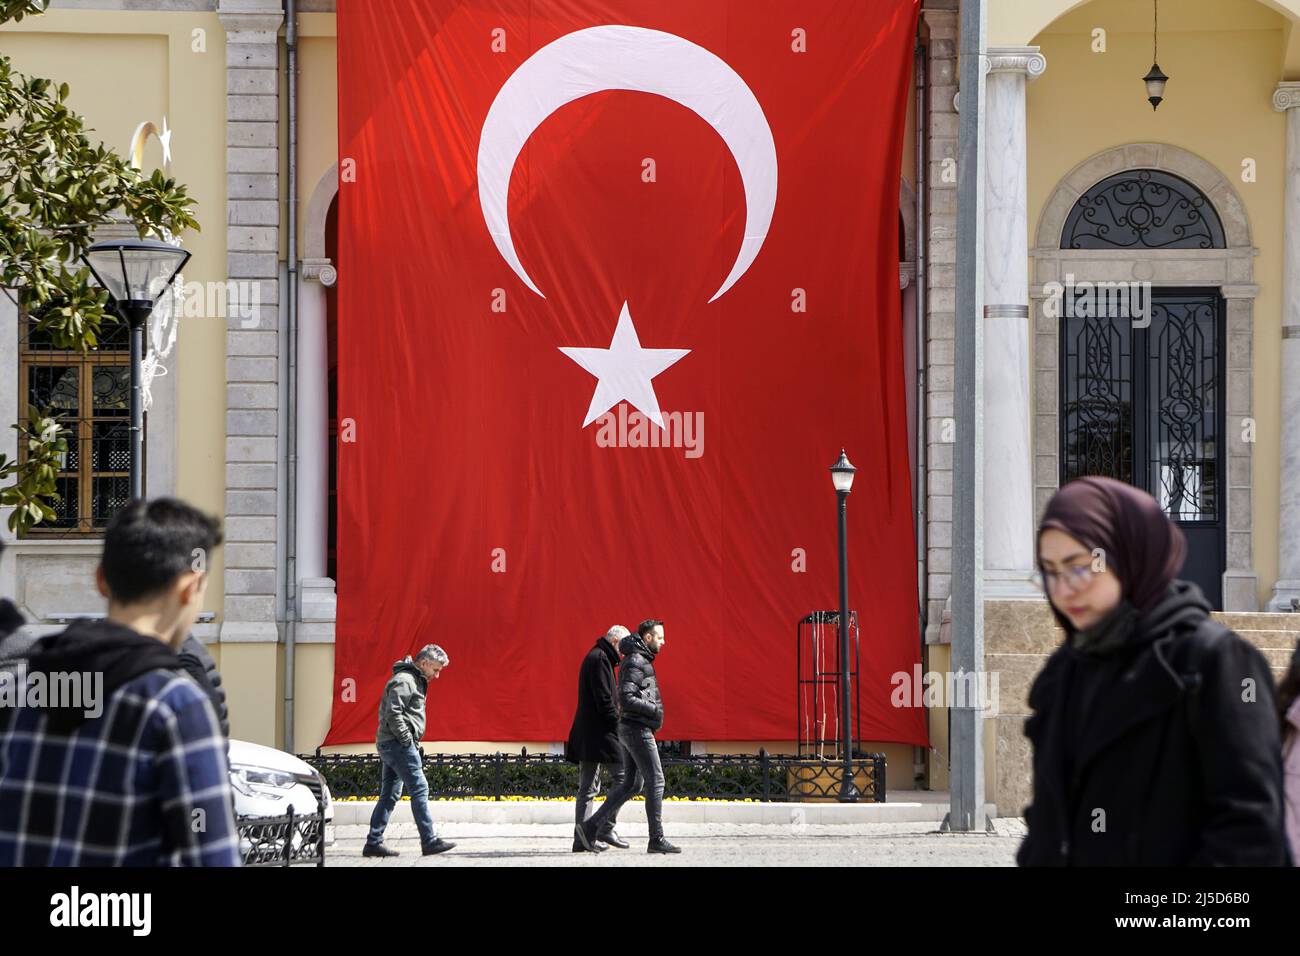 Izmir, Turkey, 19.03.2022 - Passers-by walk along a large Turkish flag in Izmir. The Turkish economy grew strongly in 2021 at eleven percent. However, the economy faces a difficult year in 2022 due to high inflation and the Ukraine war. [automated translation] Stock Photo